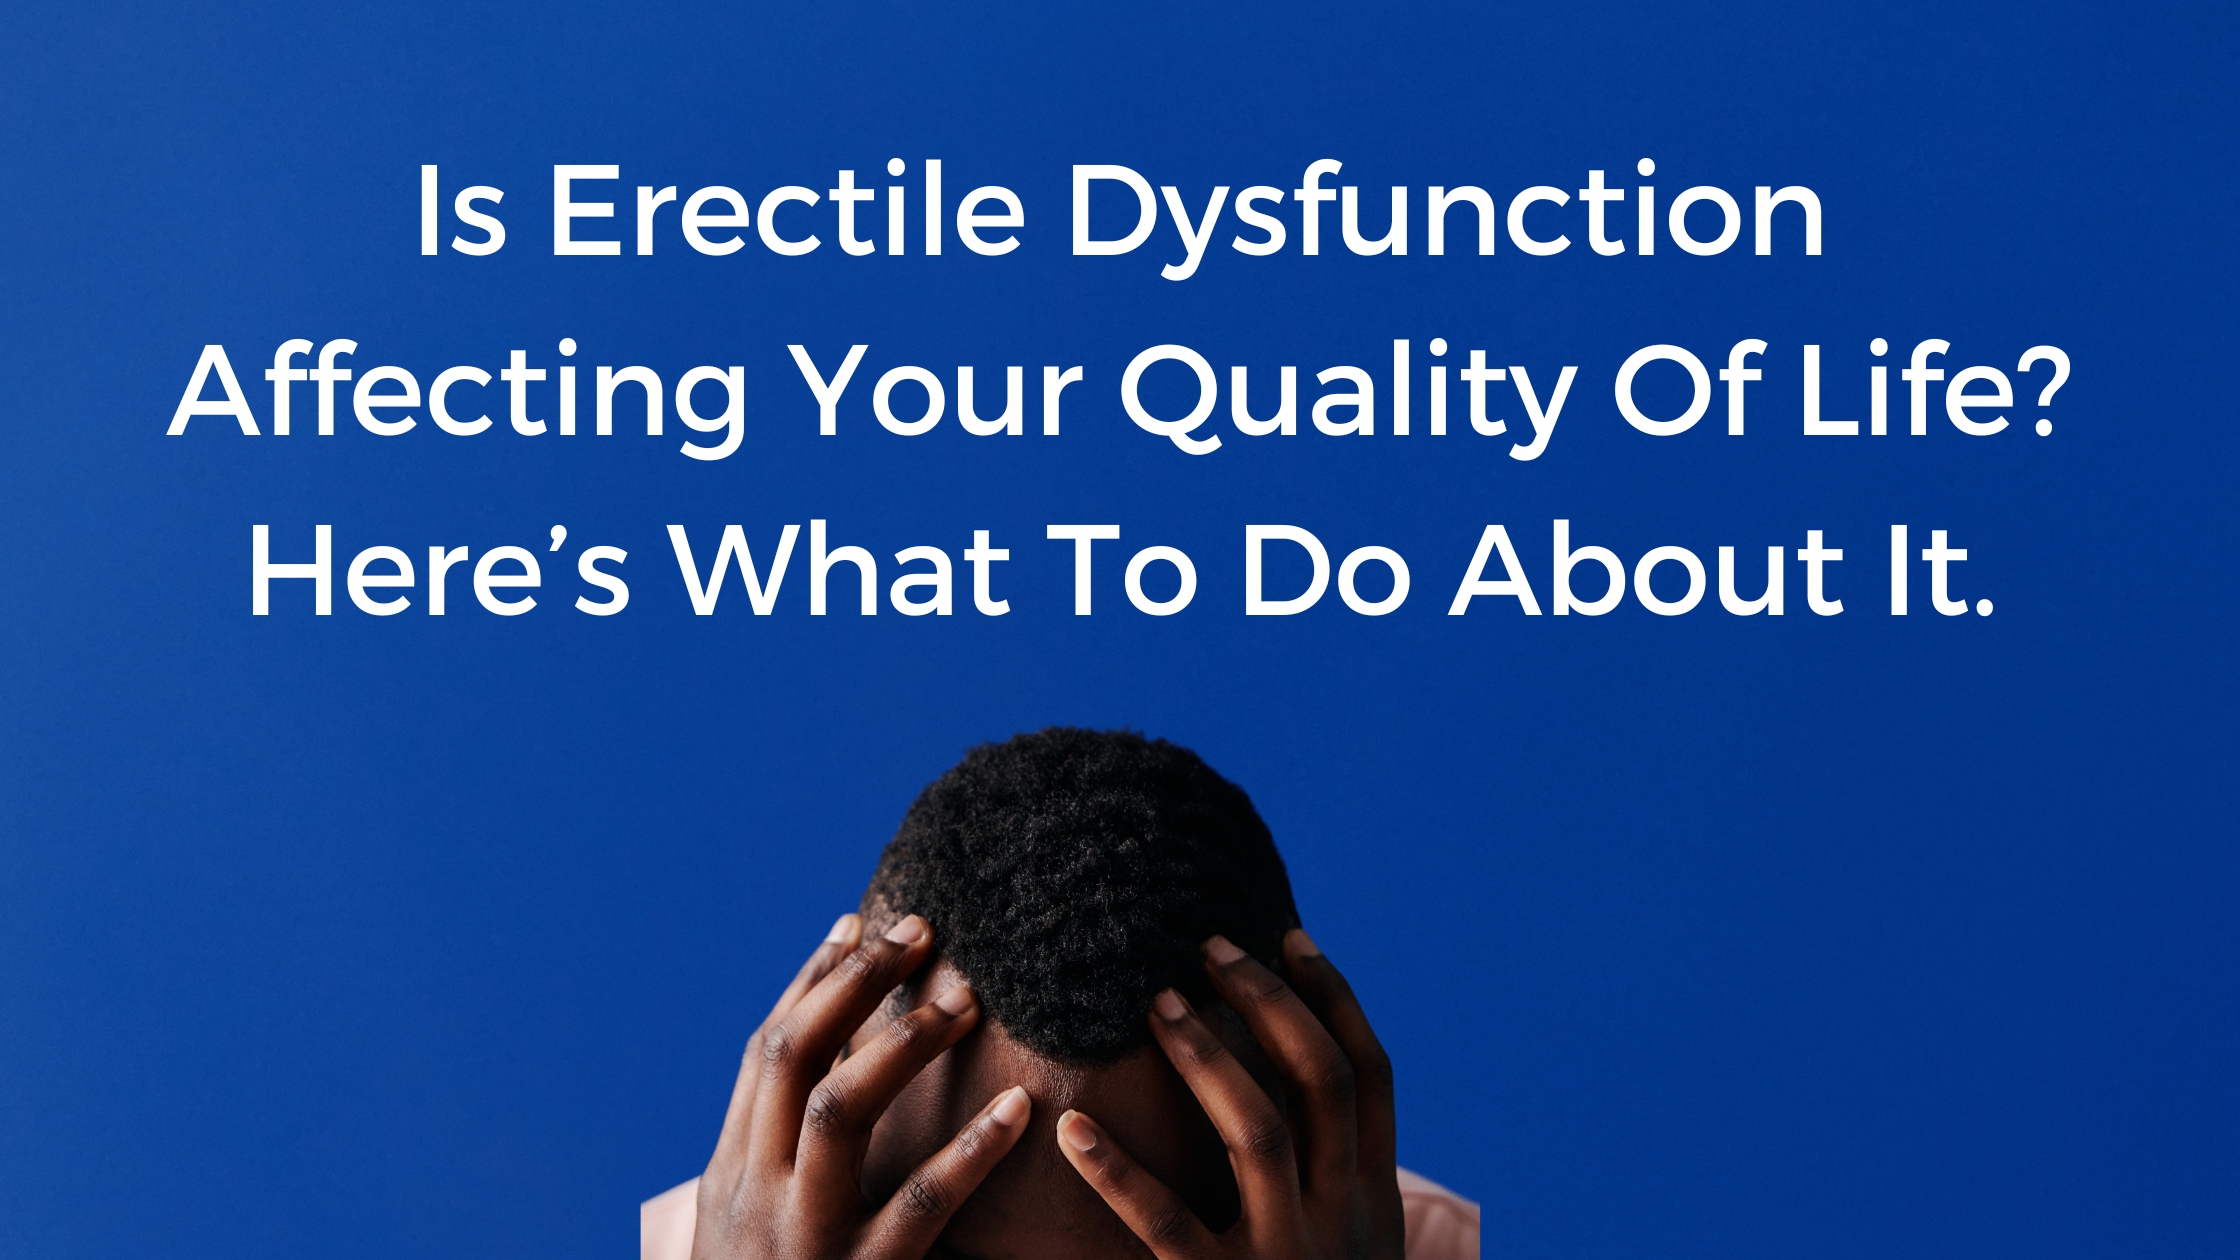 Is Erectile Dysfunction Affecting Your Quality Of Life? Here’s What To Do About It.